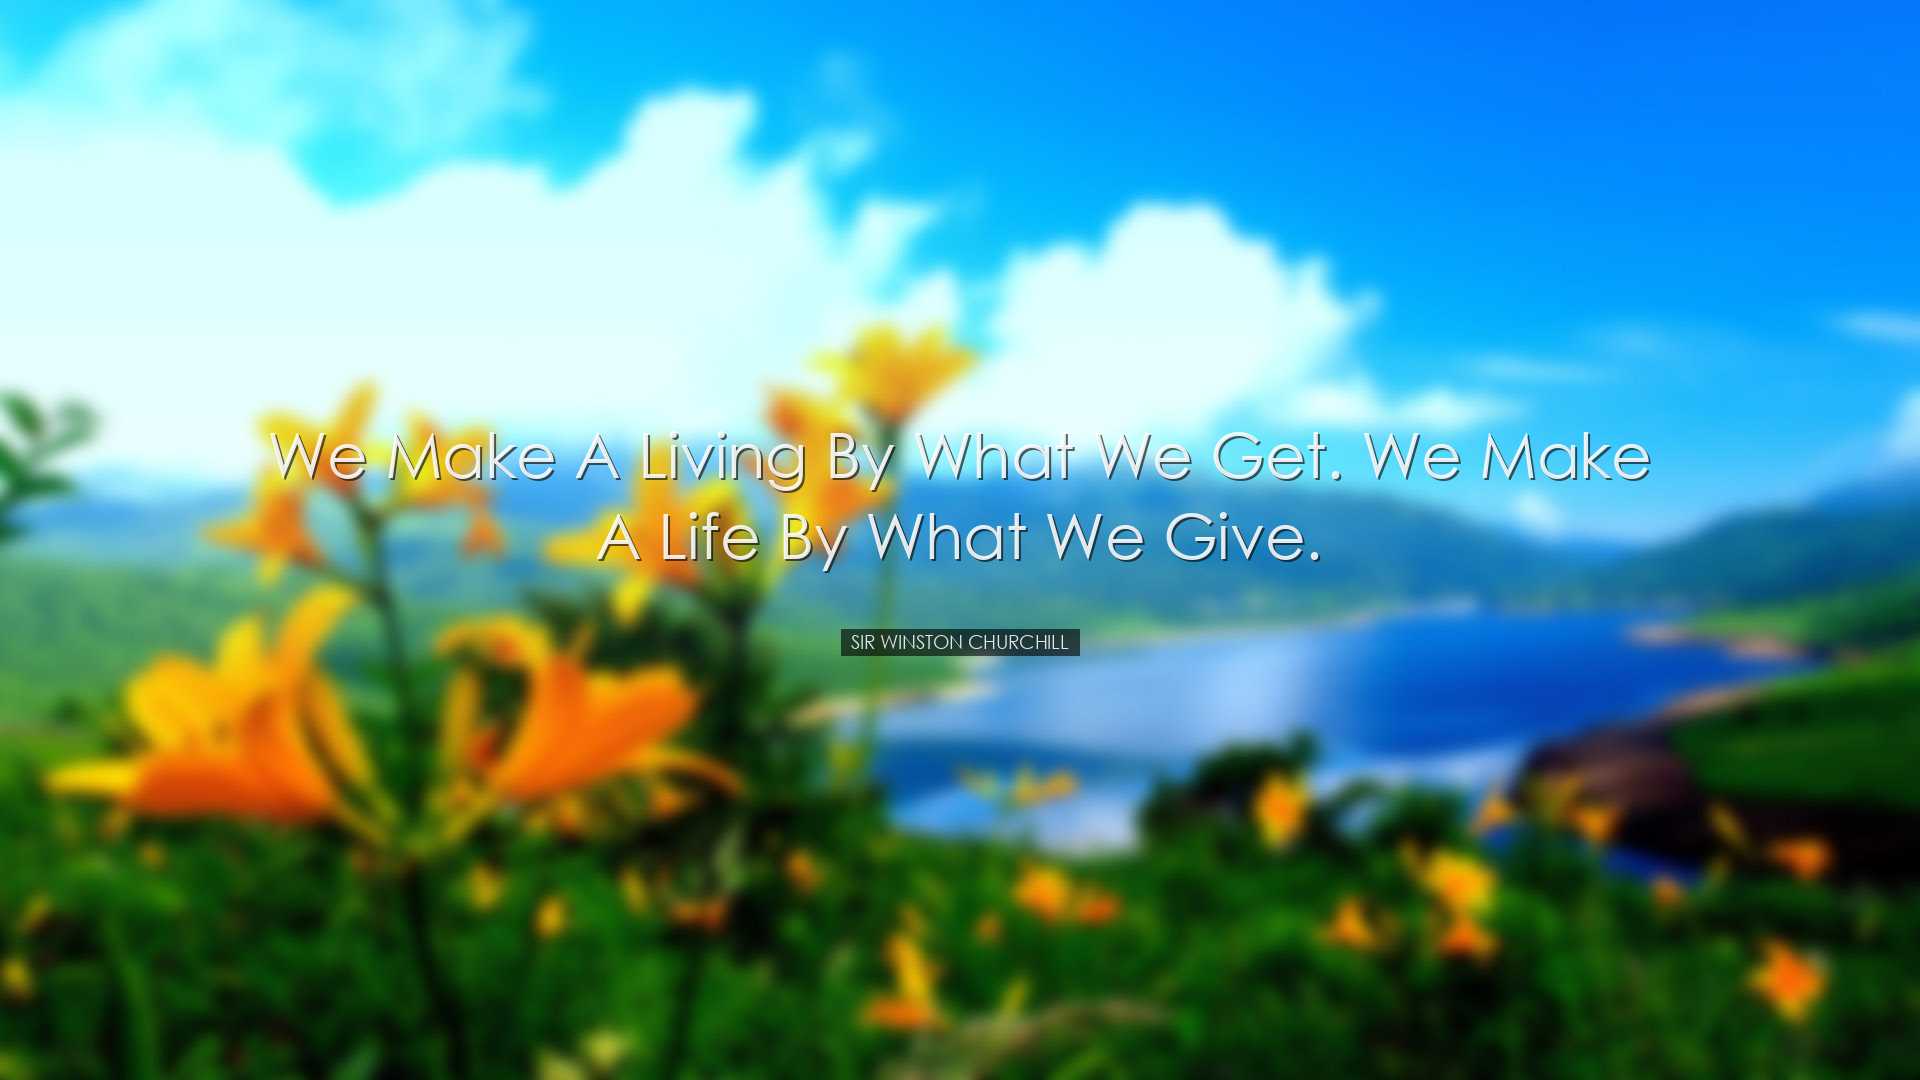 We make a living by what we get. We make a life by what we give. -